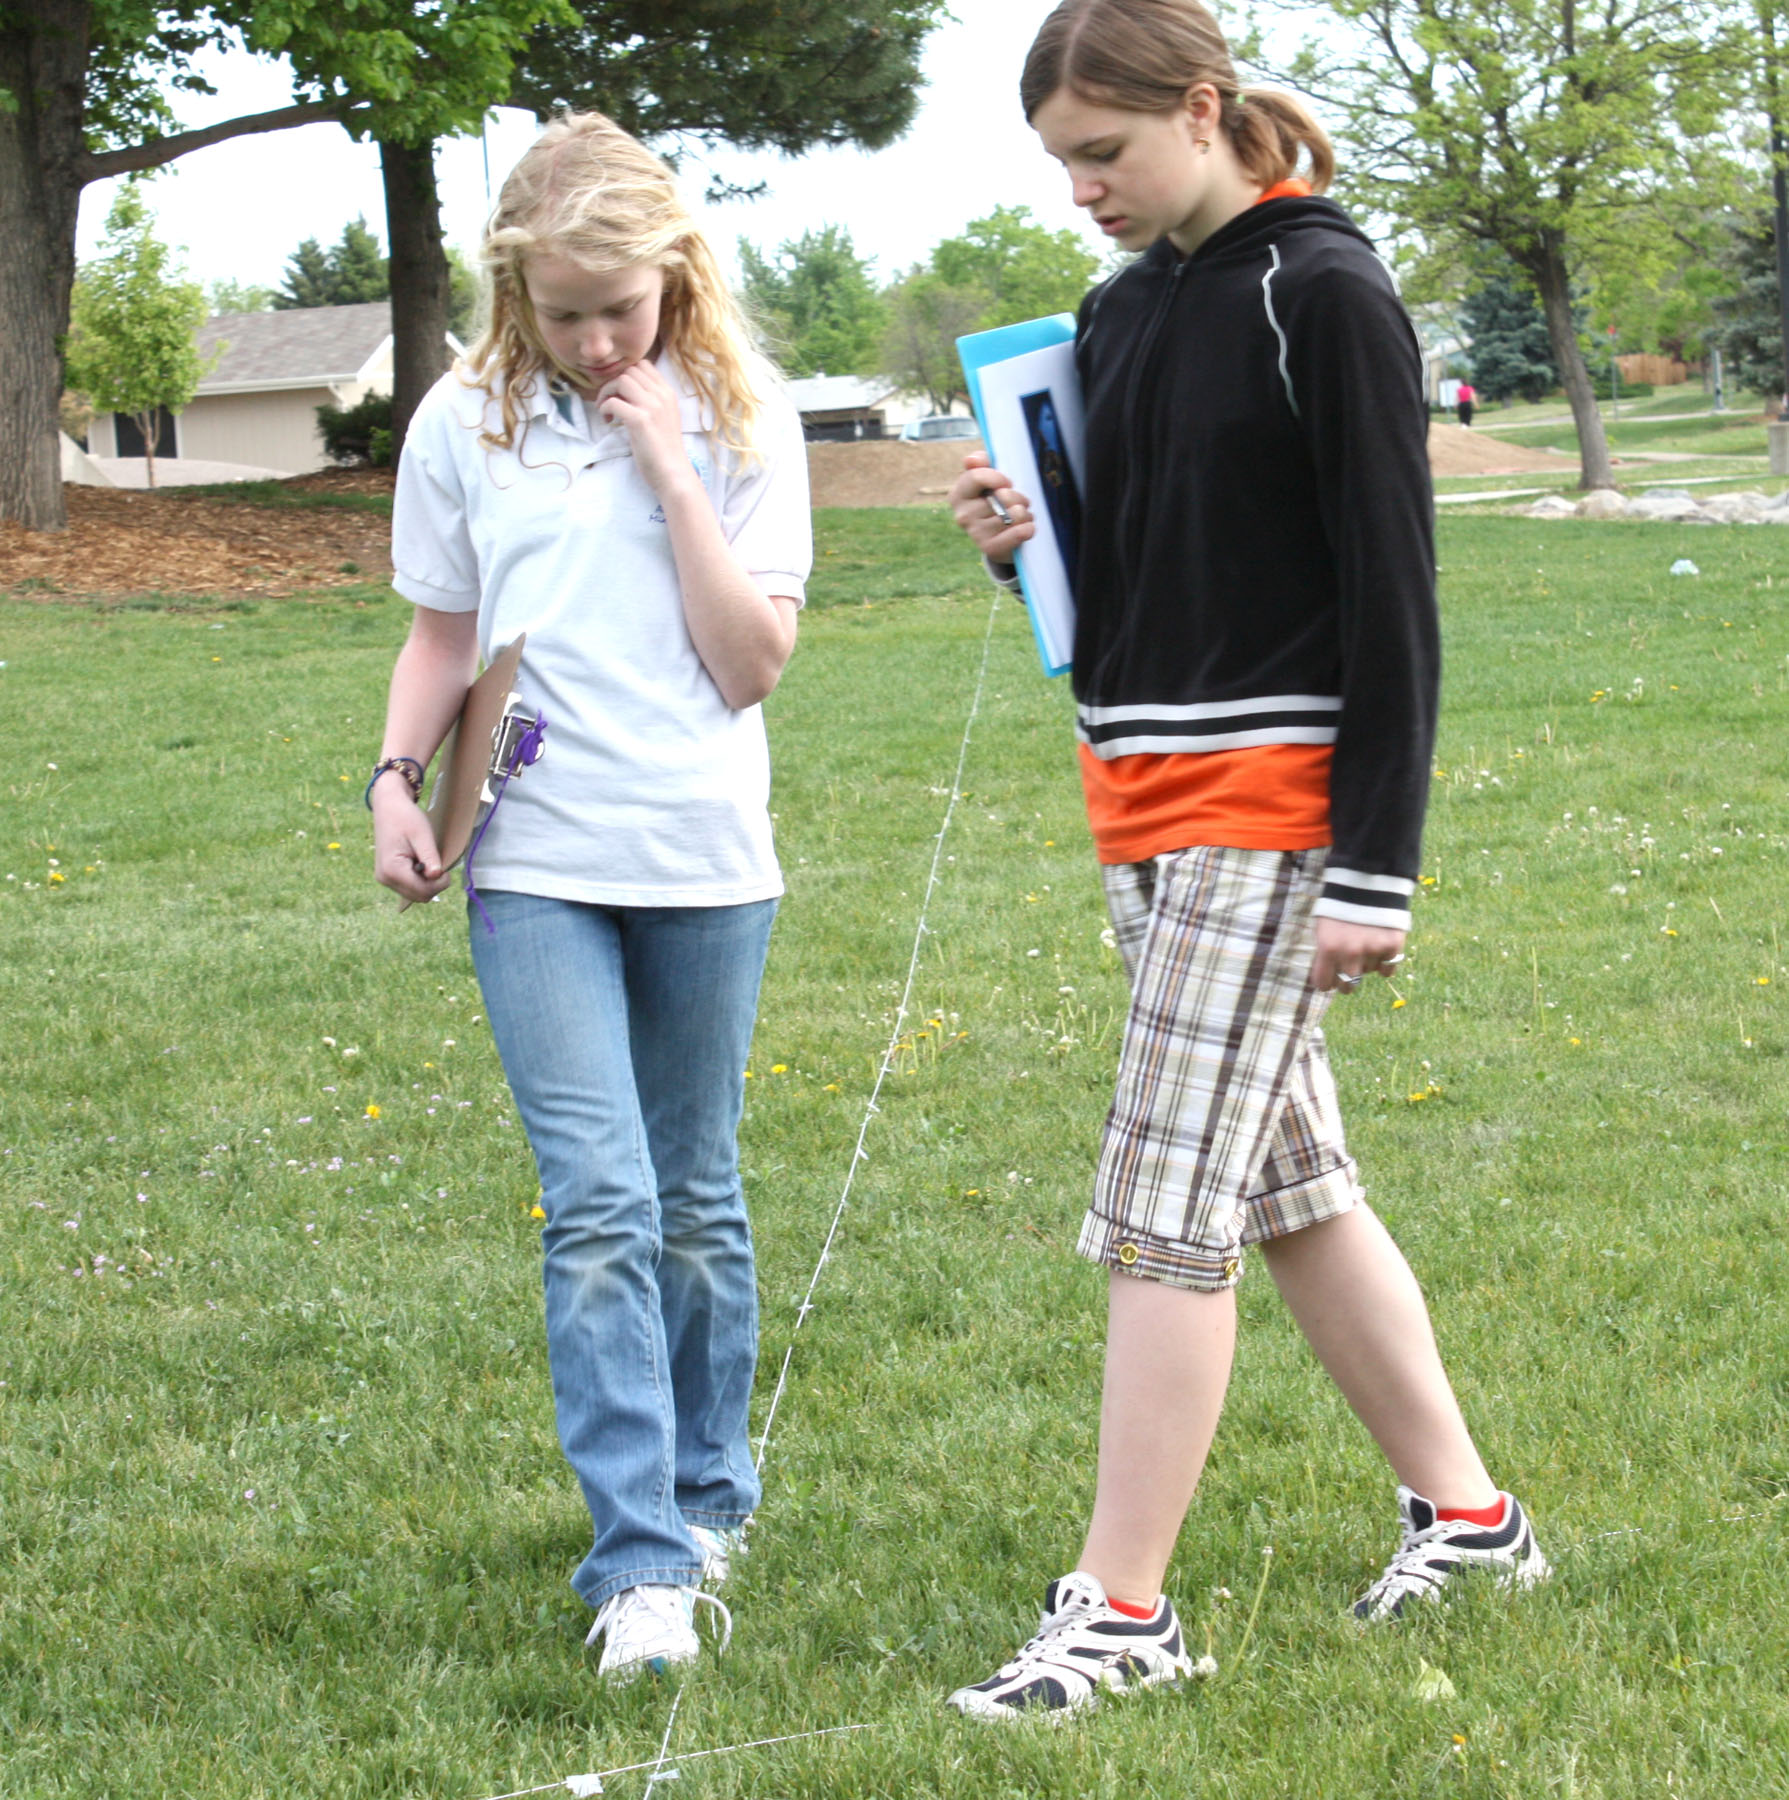 Students at Aurora Hills Middle School (CO) Participate in Extreme Navigation